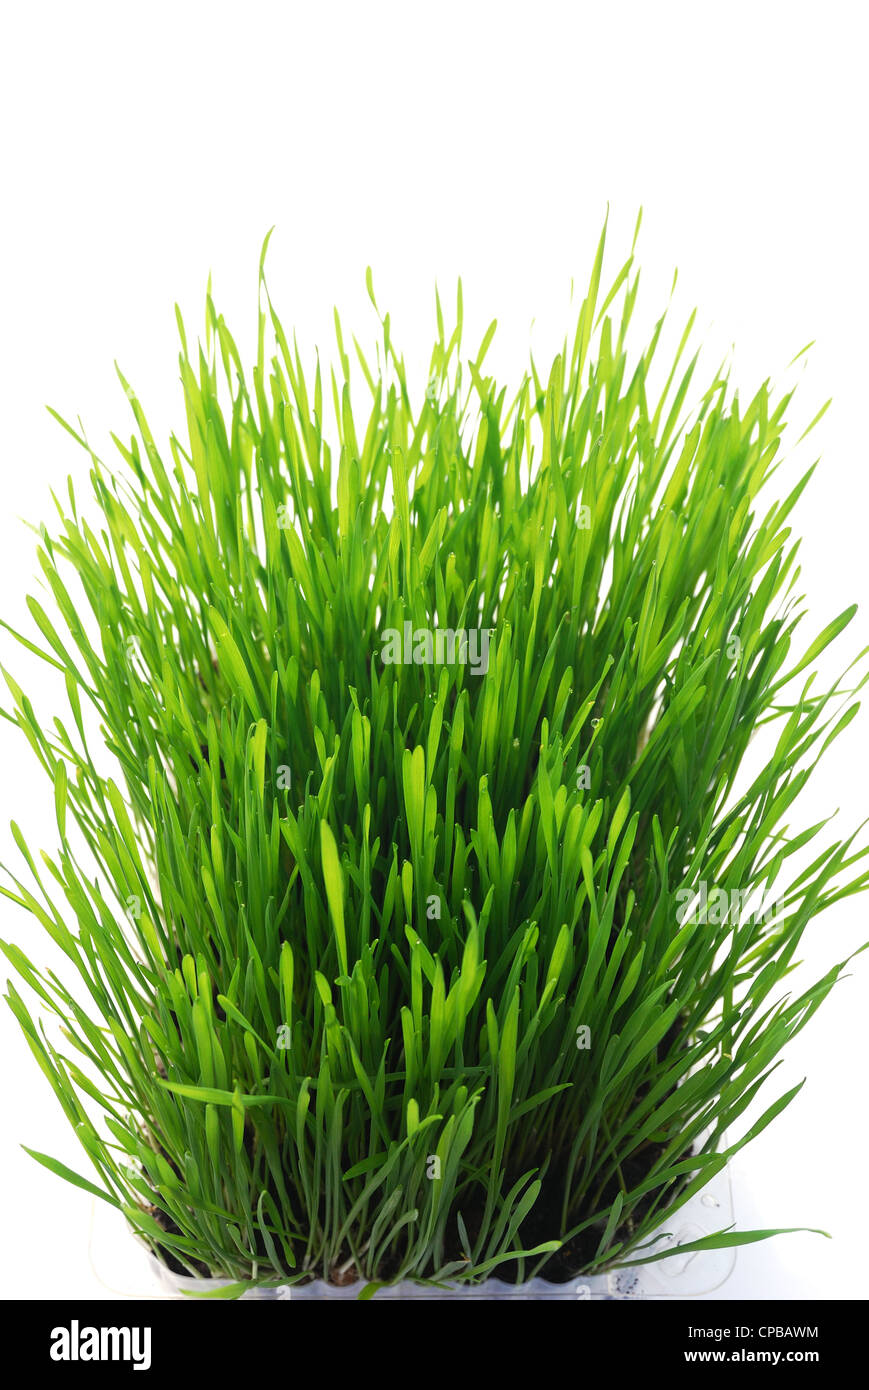 green young sprouts of wheat with tears of dew Stock Photo